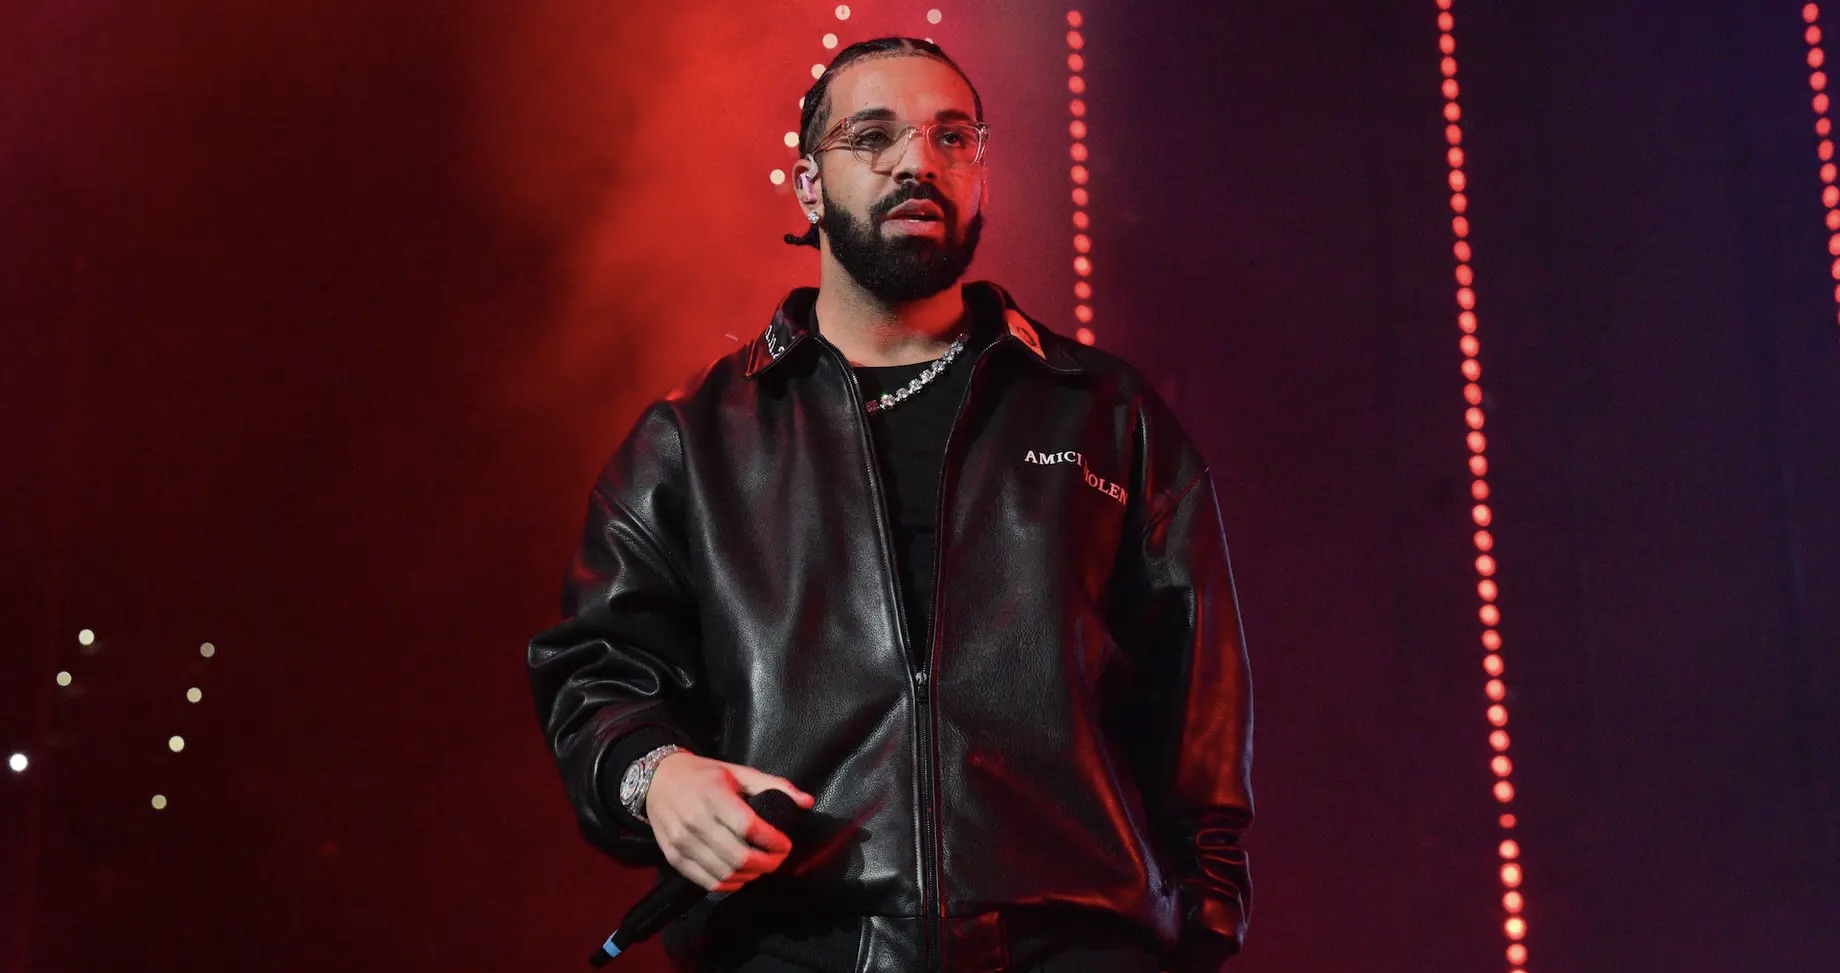 Drake Gives Away $50,000 to Fan Who Spent Furniture Money to Buy Tickets to It’s All A Blur Tour [Video]